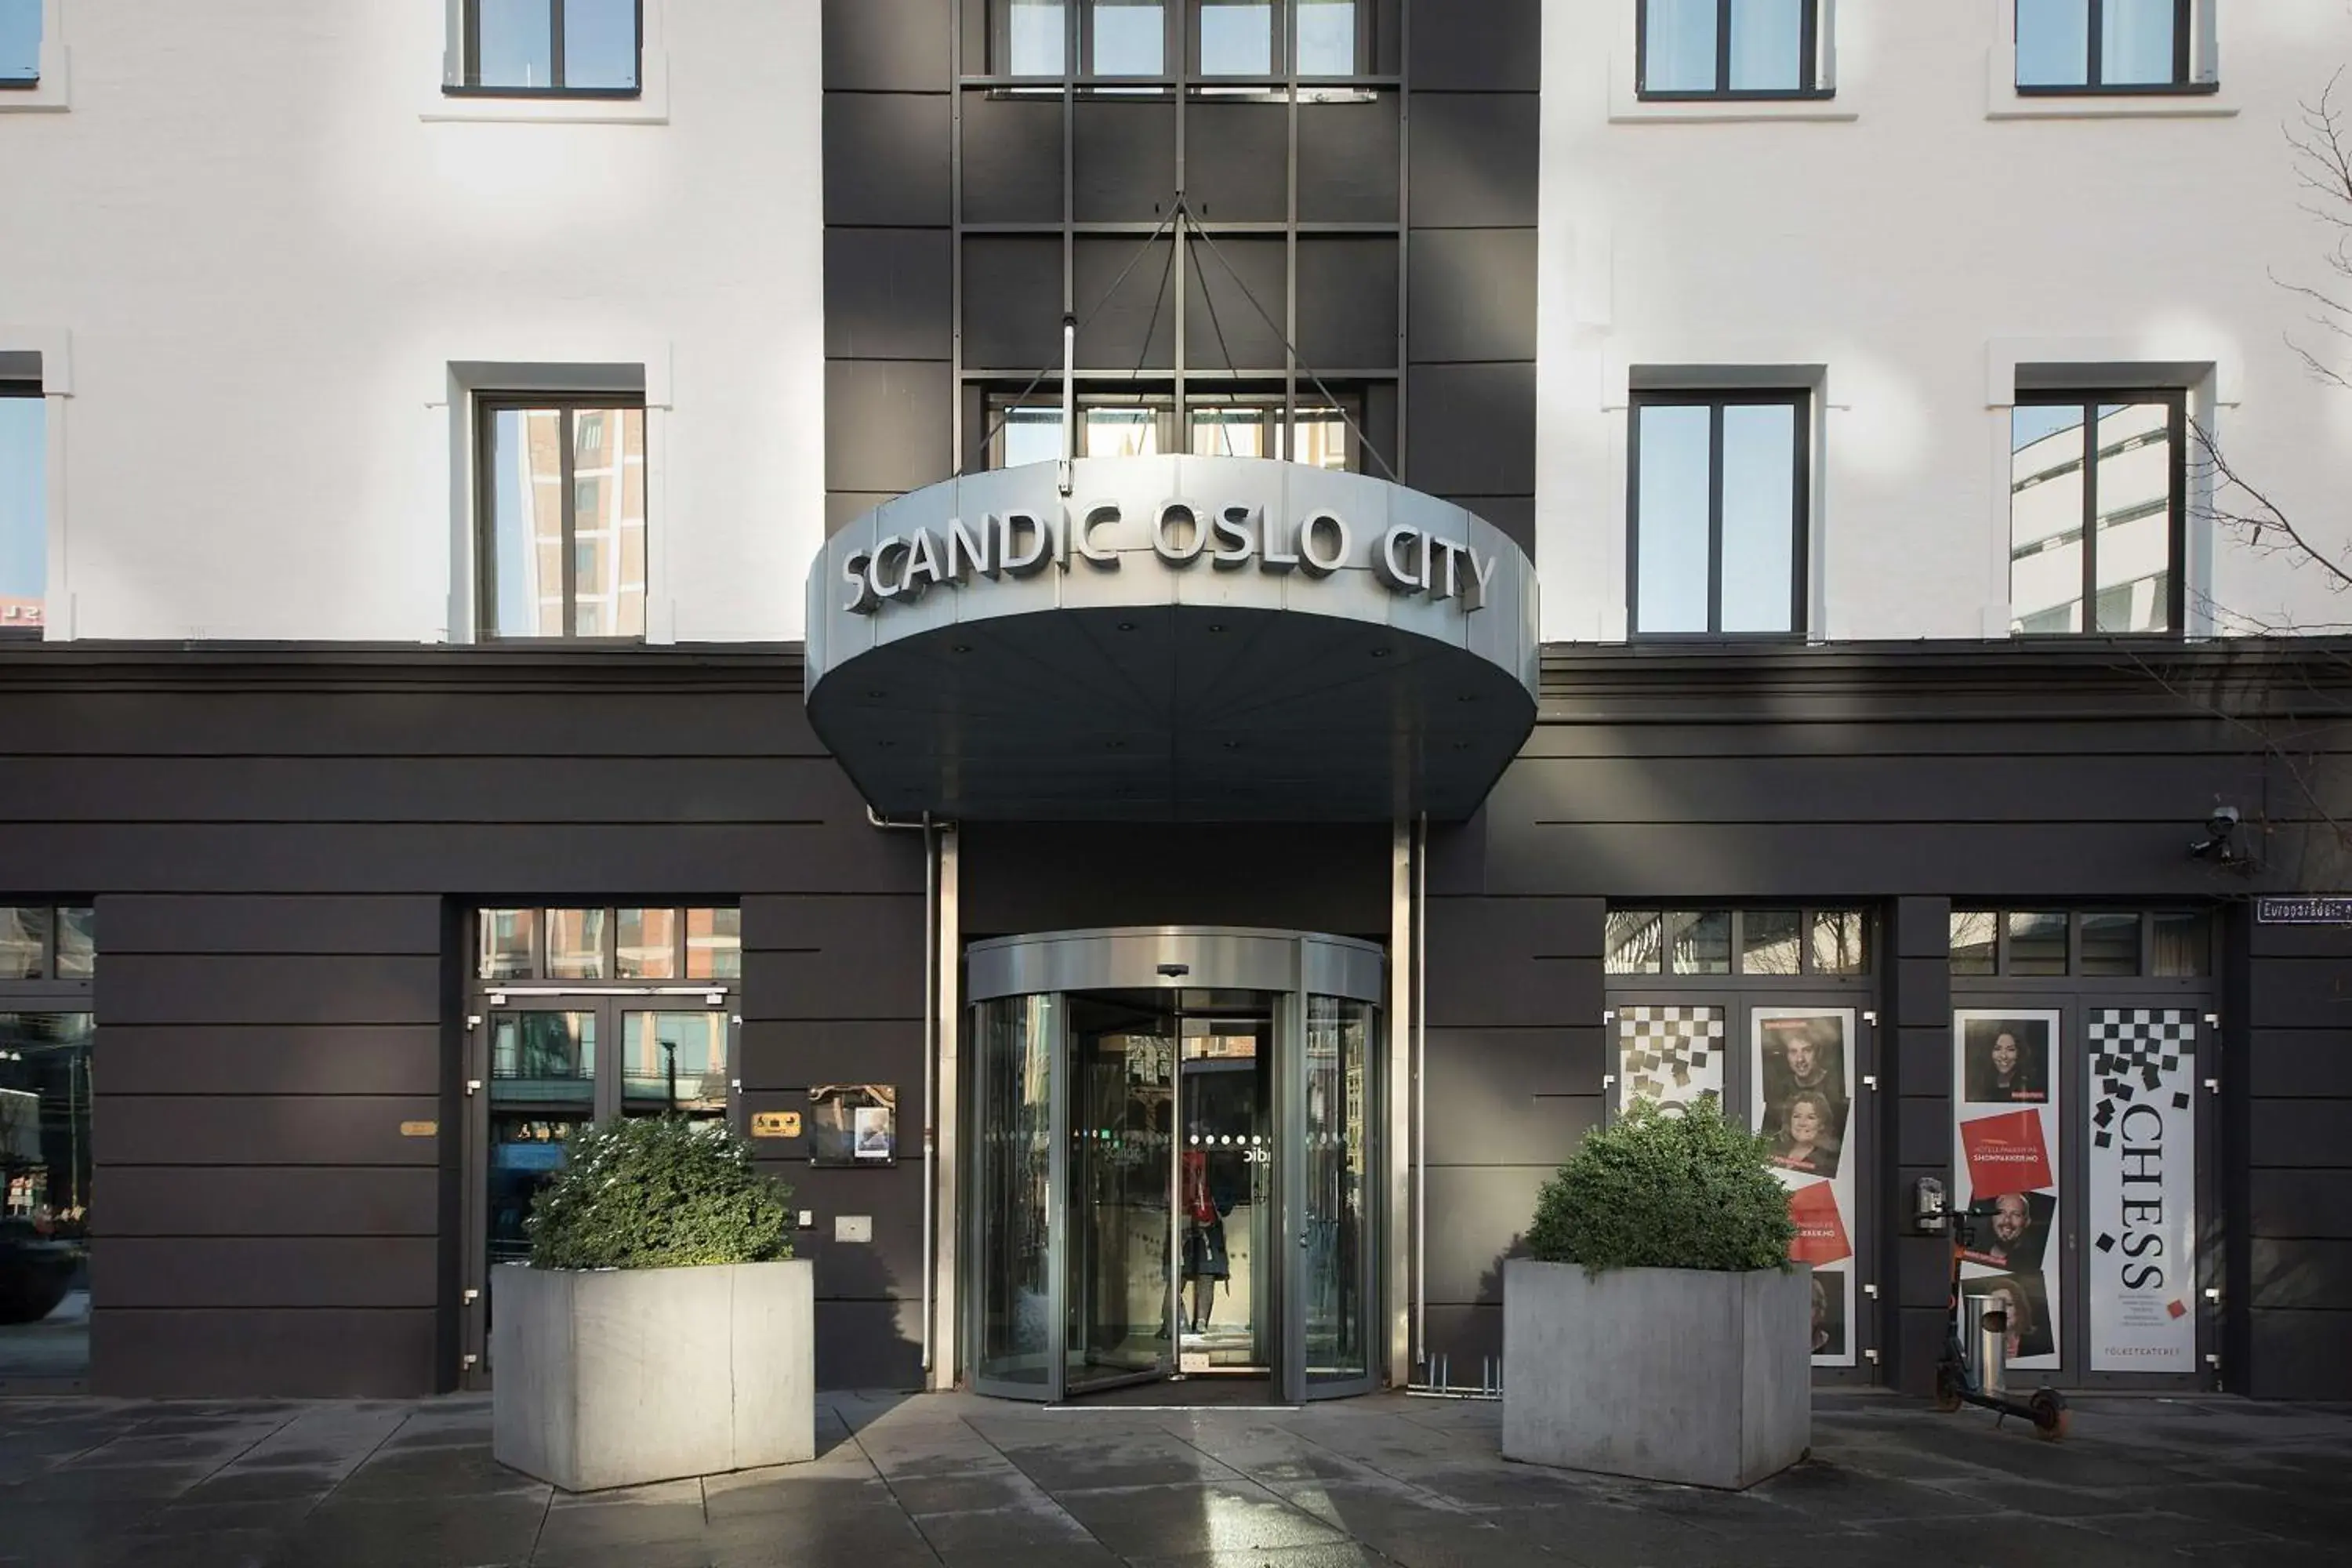 Property building in Scandic Oslo City